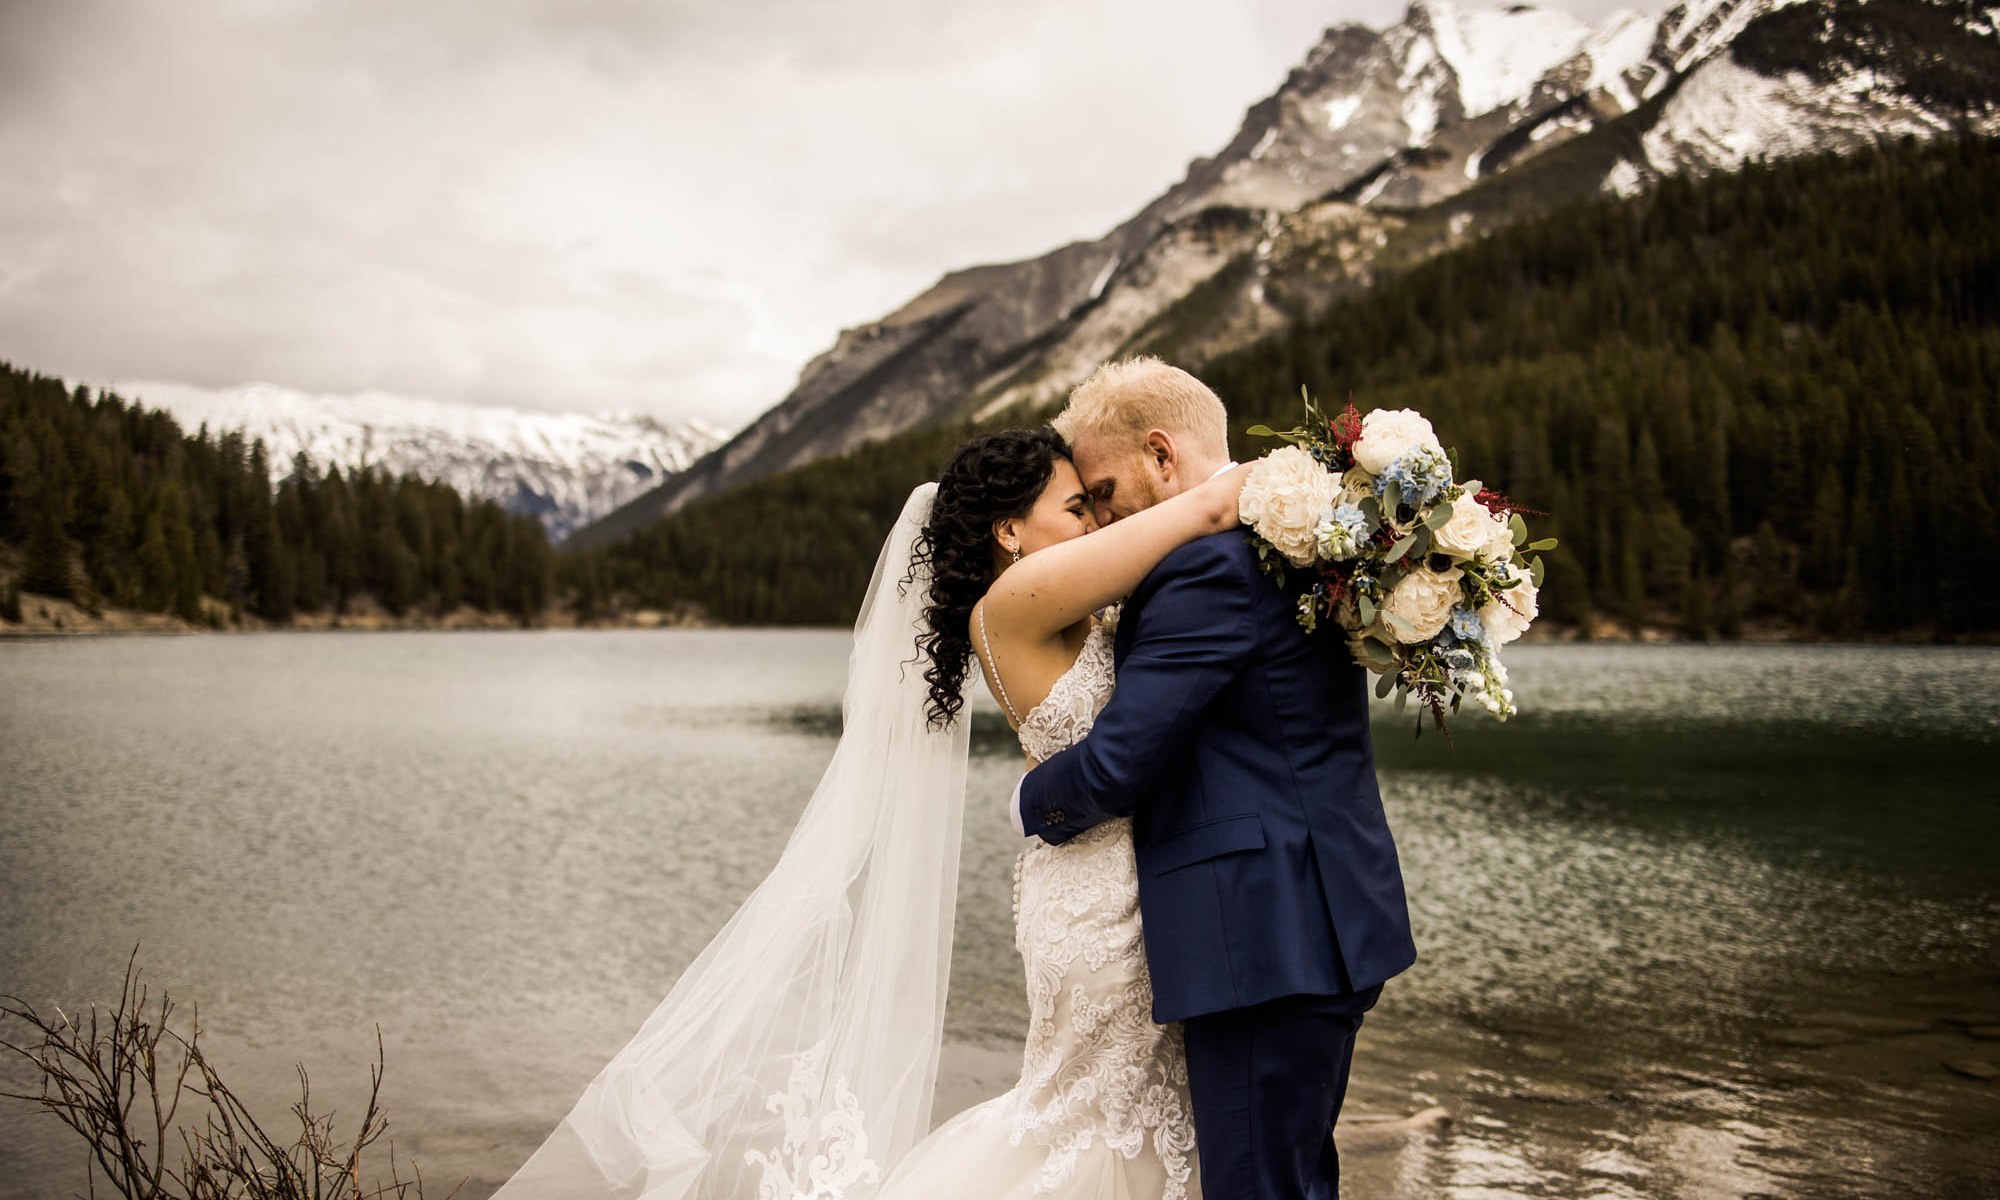 Banff wedding photographer, a couple on their wedding day at the Rimrock, St Mary's Parish in Banff National Park